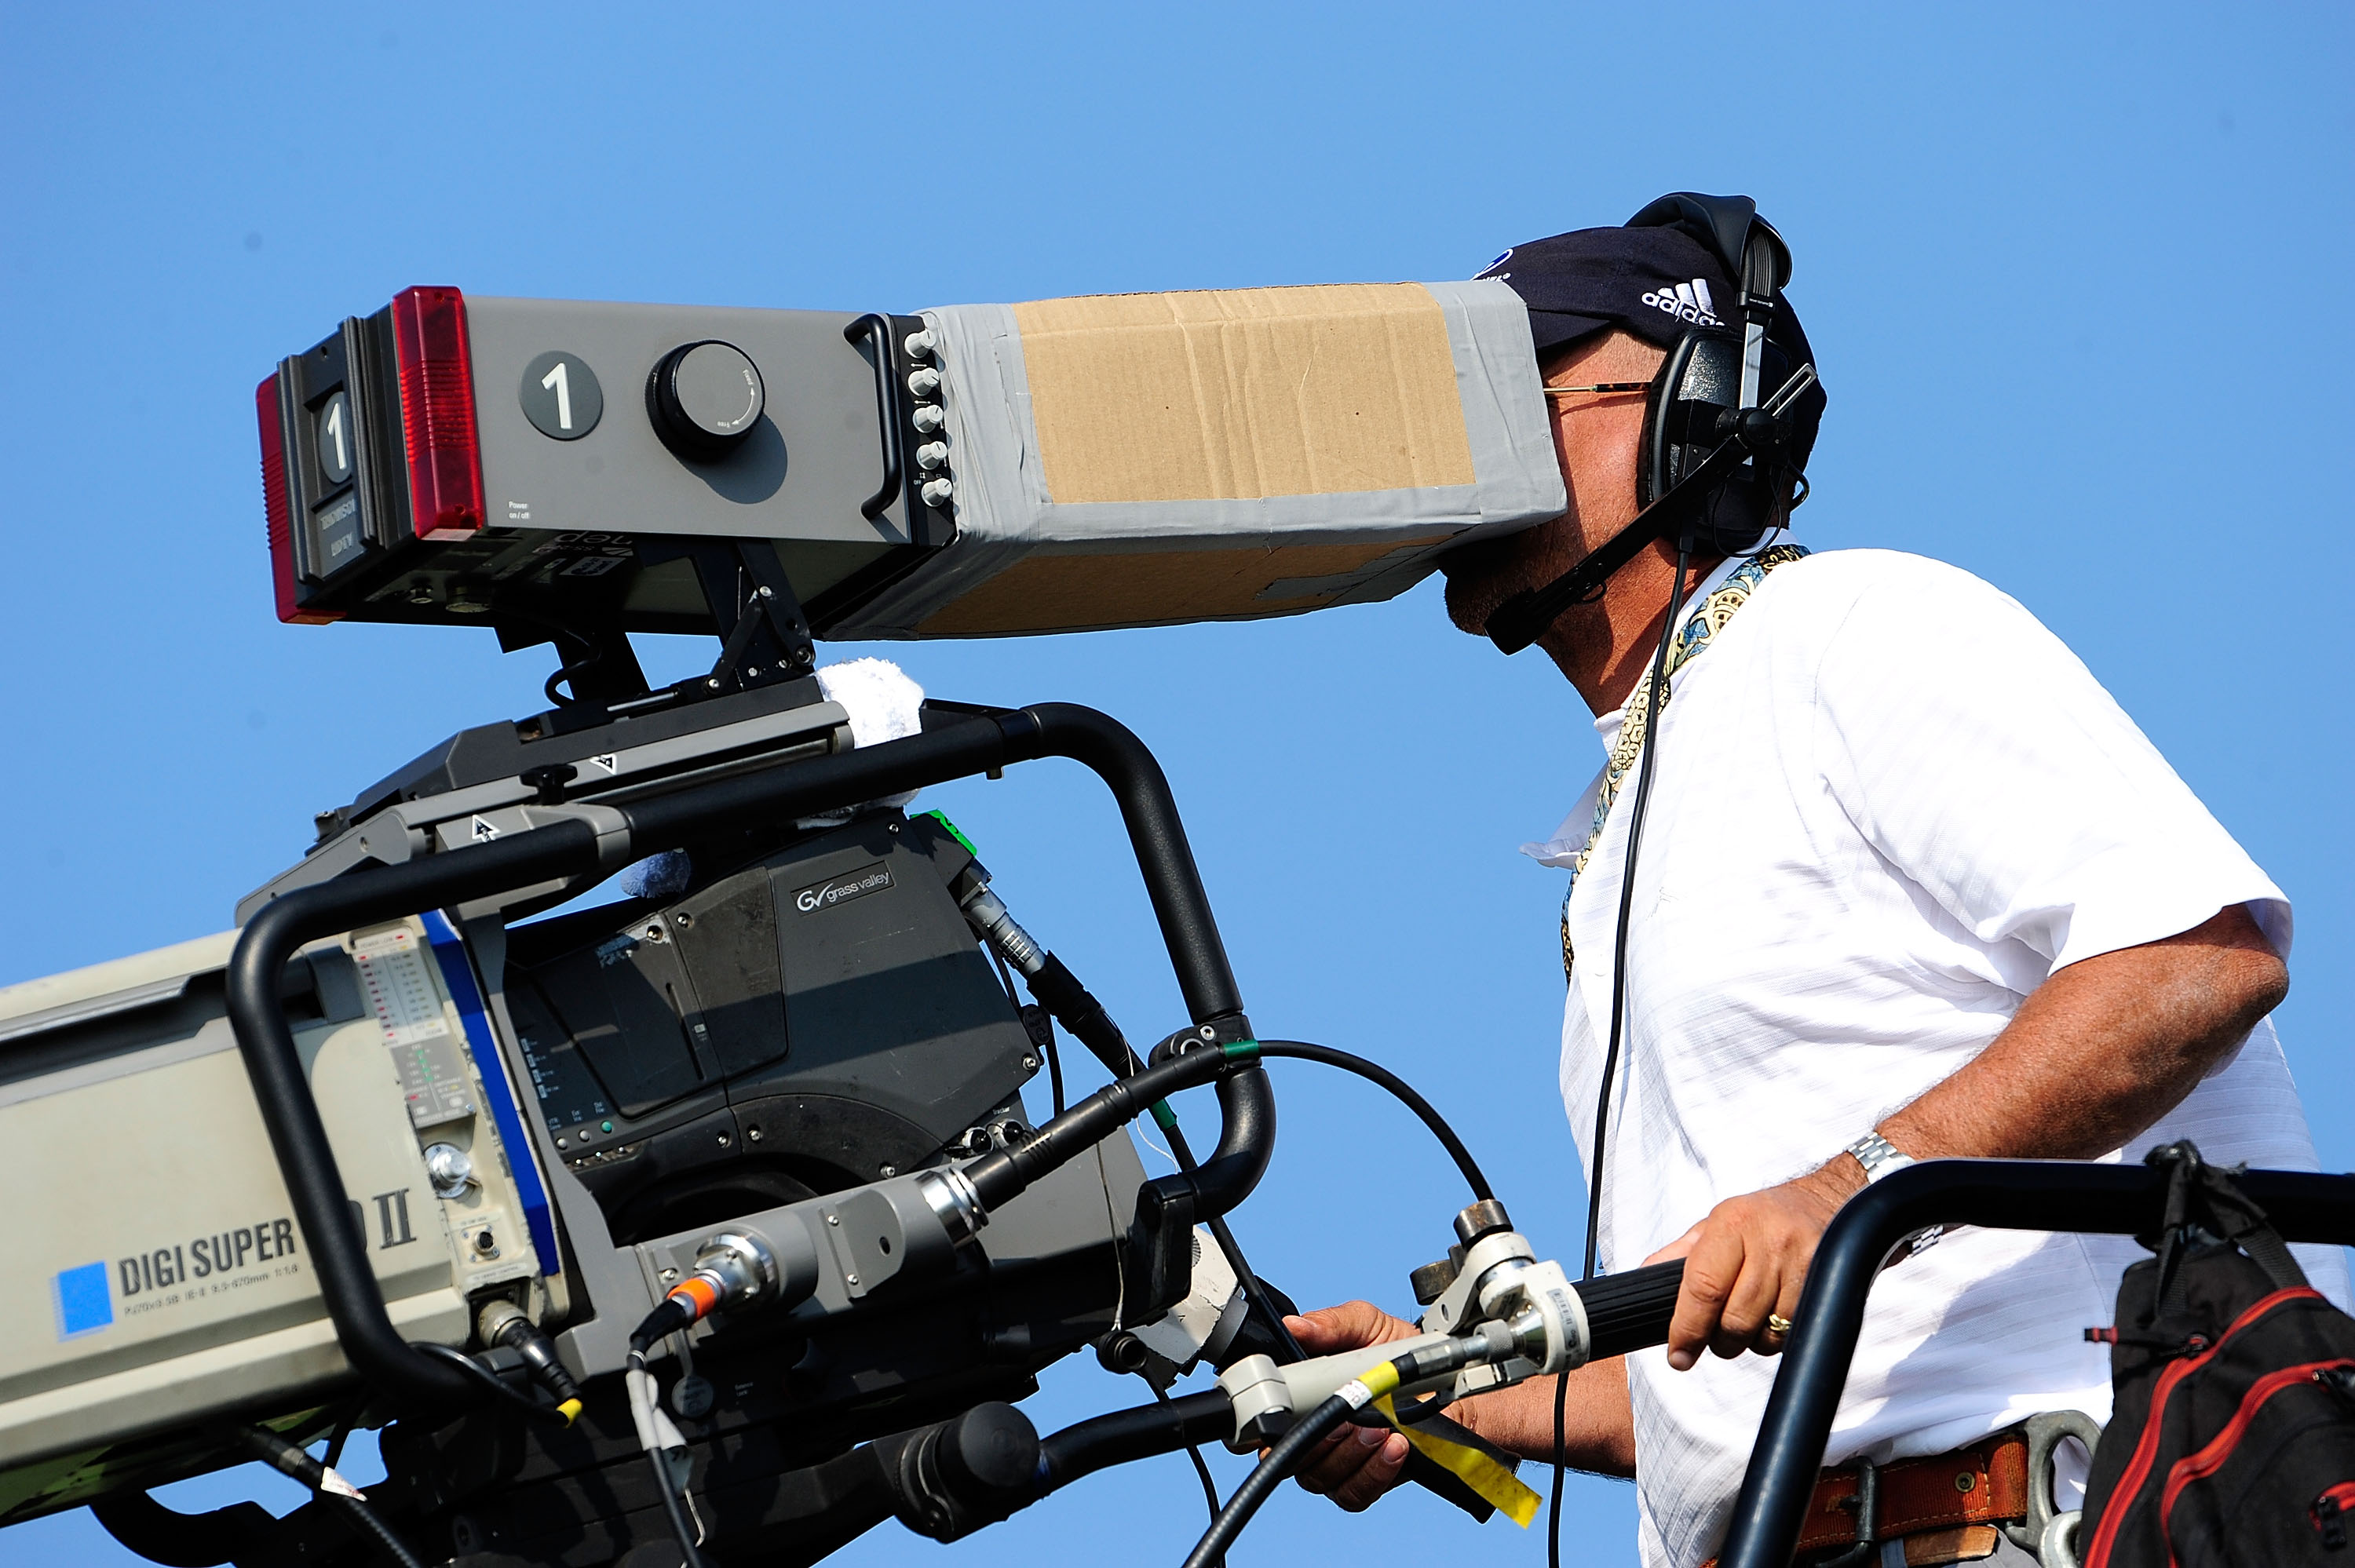 KAPALUA, HI - JANUARY 09:  A television camera records the action during the third round of the SBS Championship at the Plantation course on January 9, 2010 in Kapalua, Maui, Hawaii.  (Photo by Sam Greenwood/Getty Images)